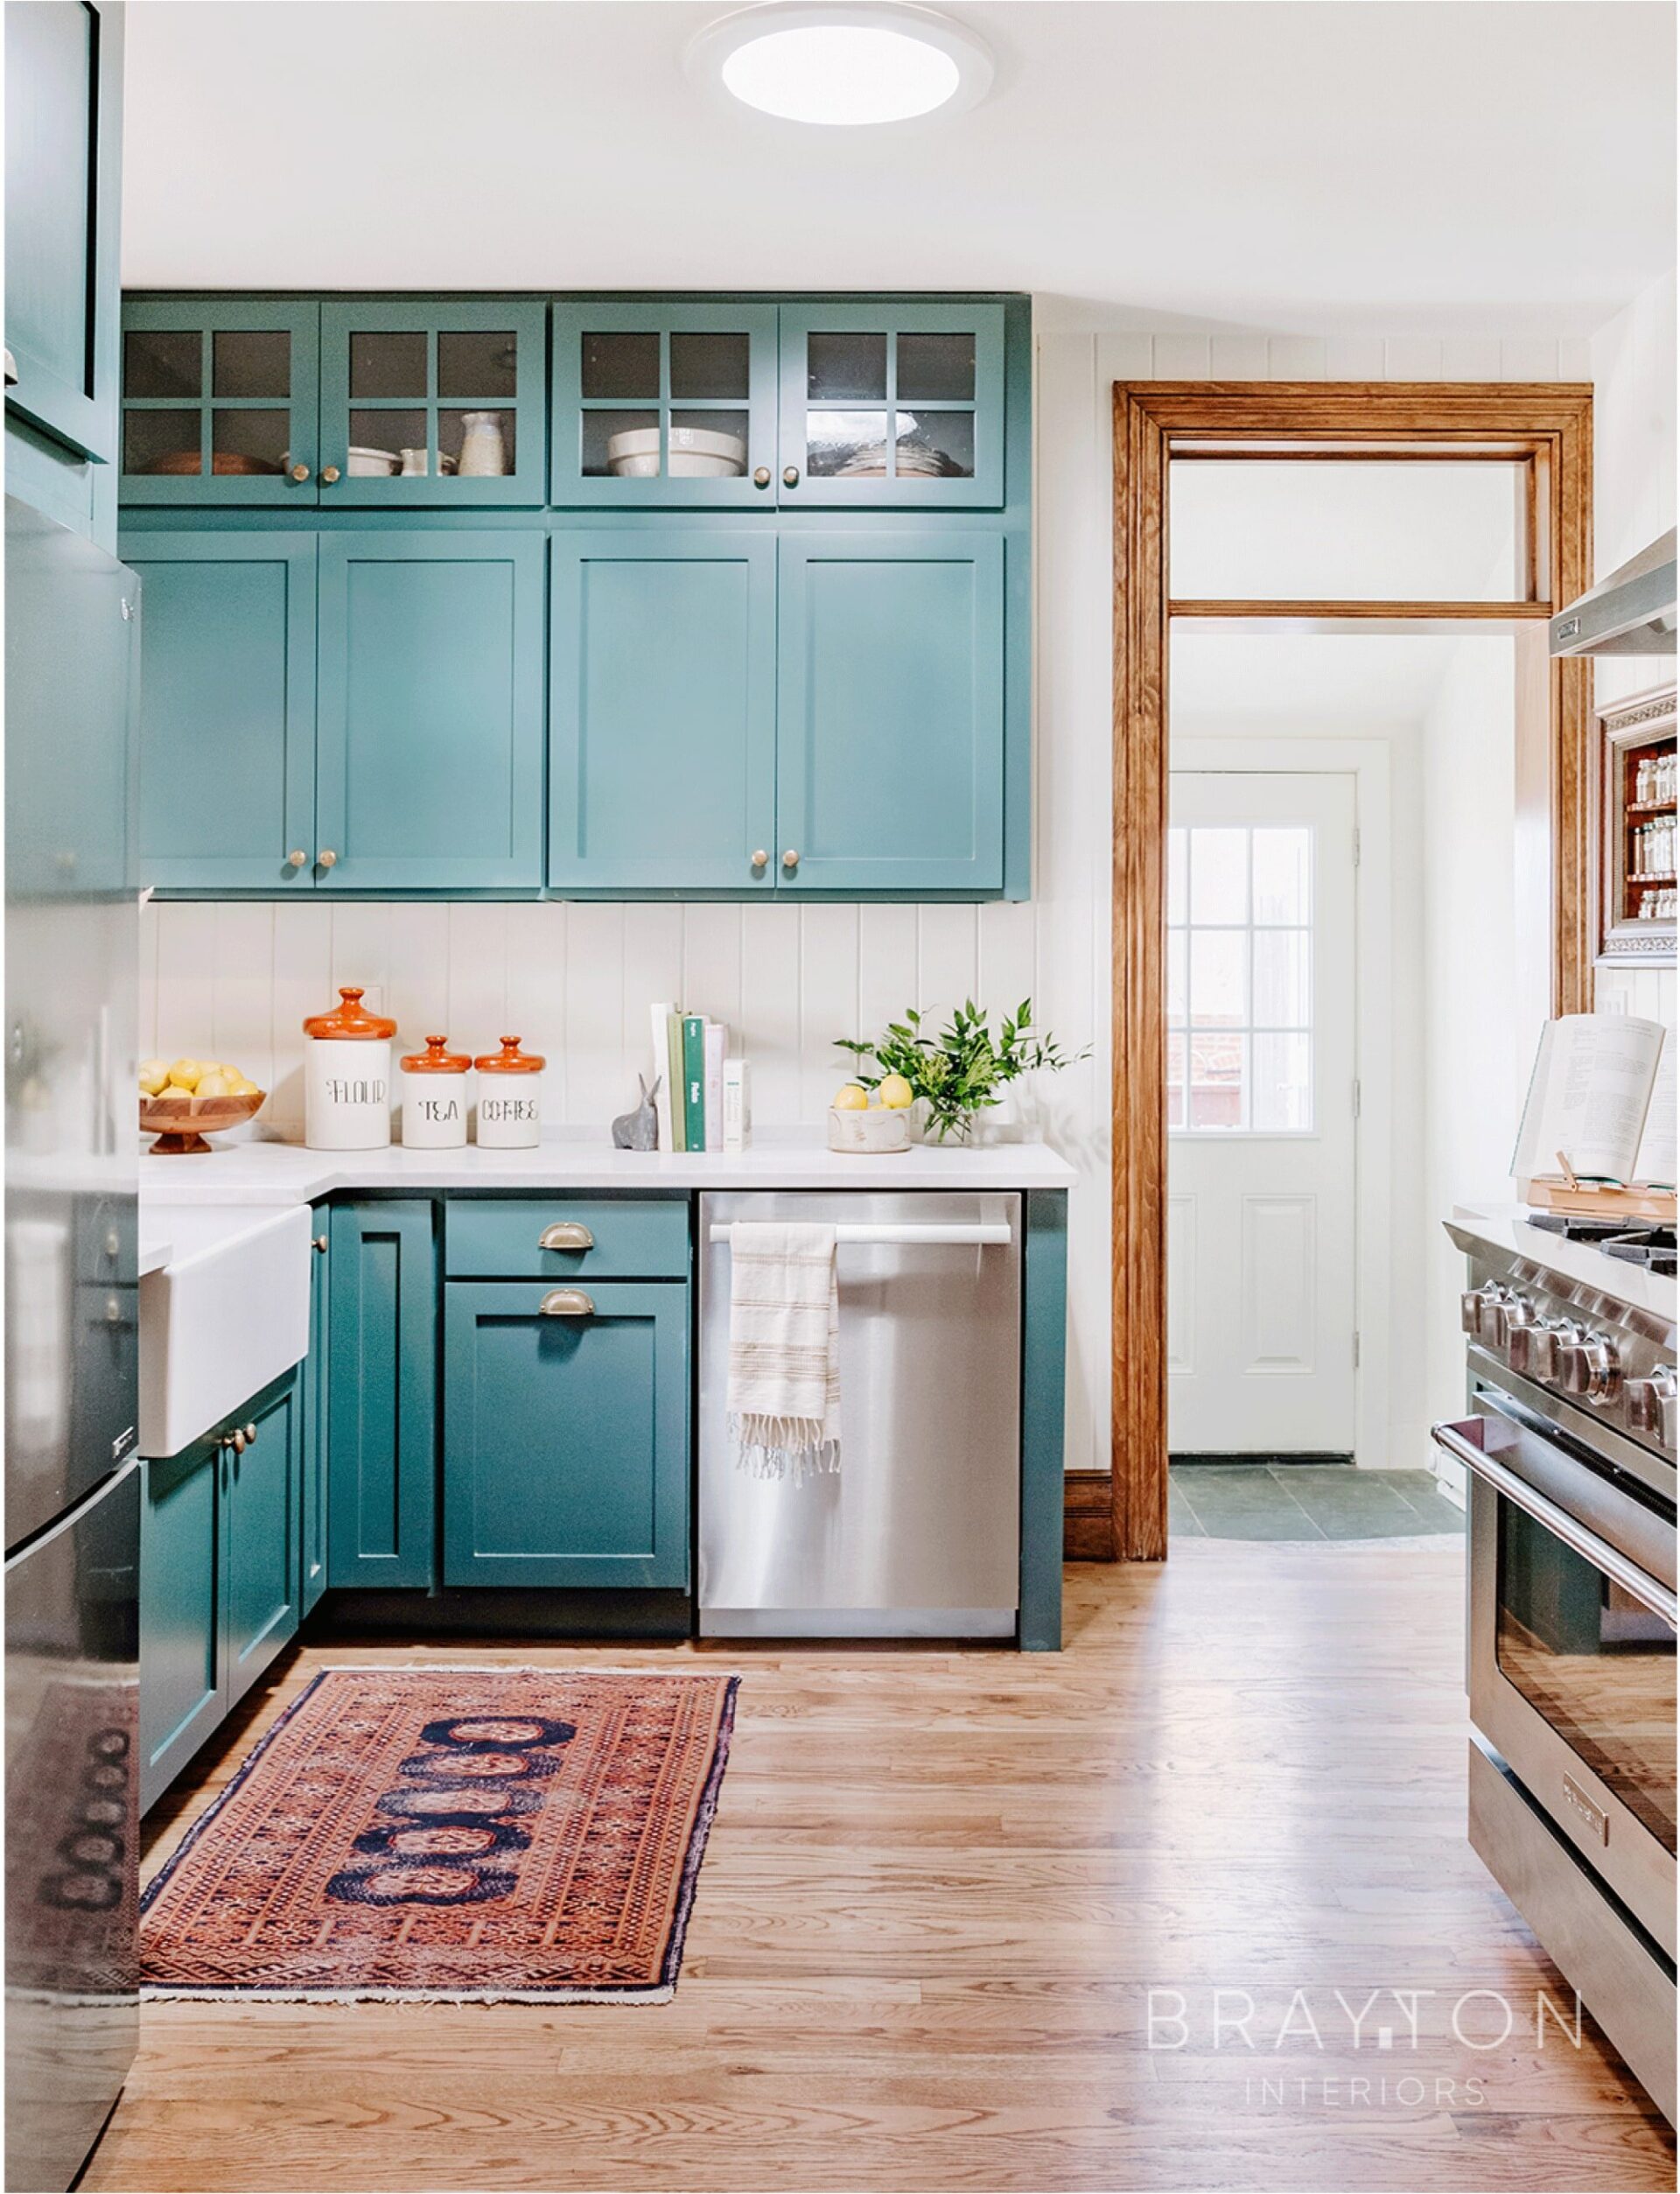 Originally built in 1903, this historic townhome remodel keeps with the original architecture. Featuring classic shaker style cabinetry, real marble countertops and handmade brass hardware.